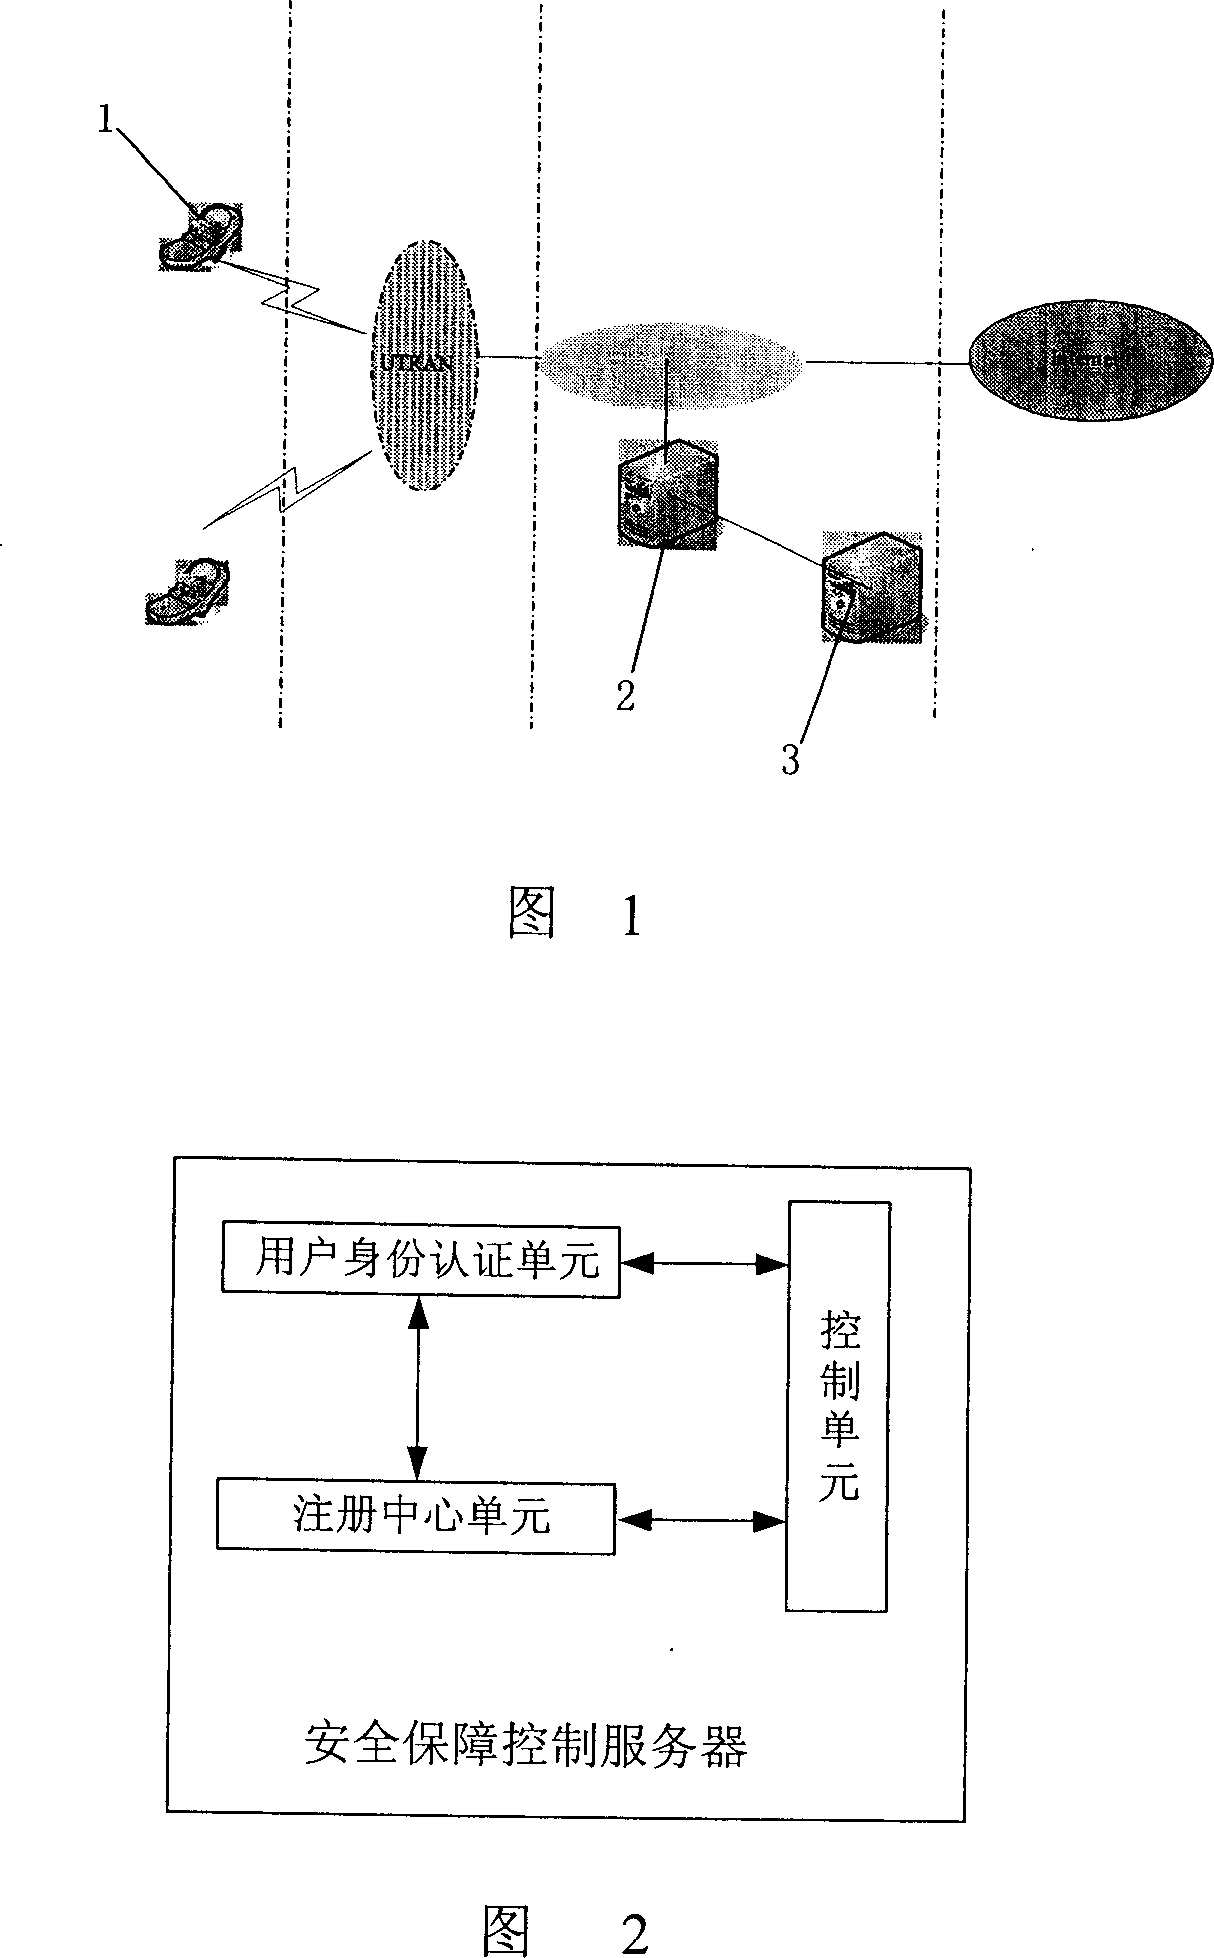 Mobile terminal information resource safety security control and realizing method